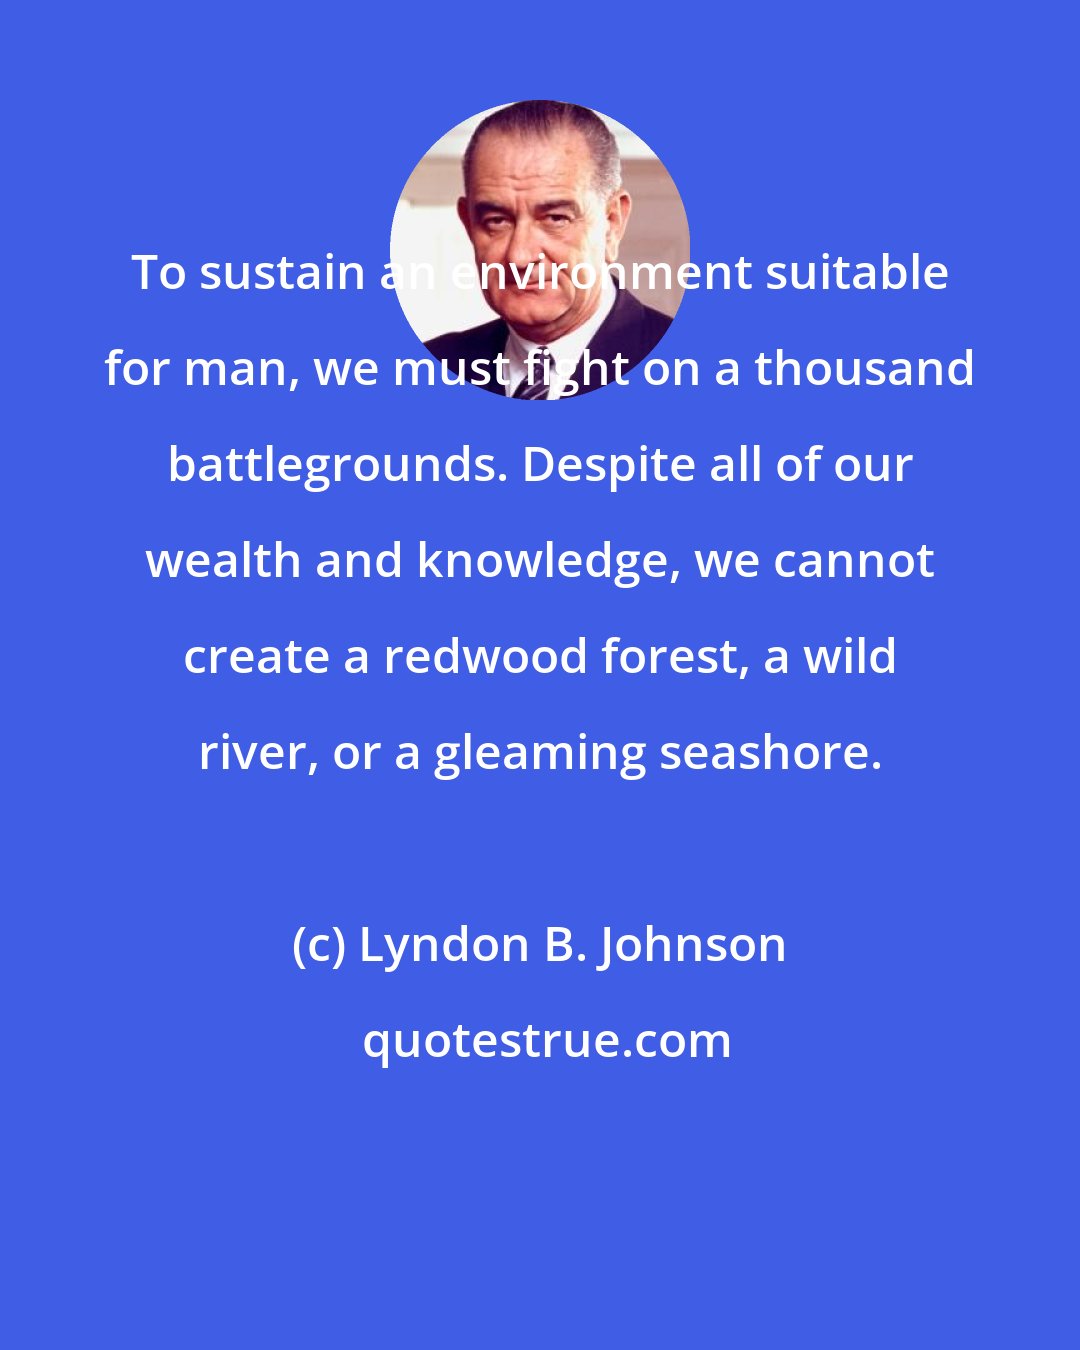 Lyndon B. Johnson: To sustain an environment suitable for man, we must fight on a thousand battlegrounds. Despite all of our wealth and knowledge, we cannot create a redwood forest, a wild river, or a gleaming seashore.